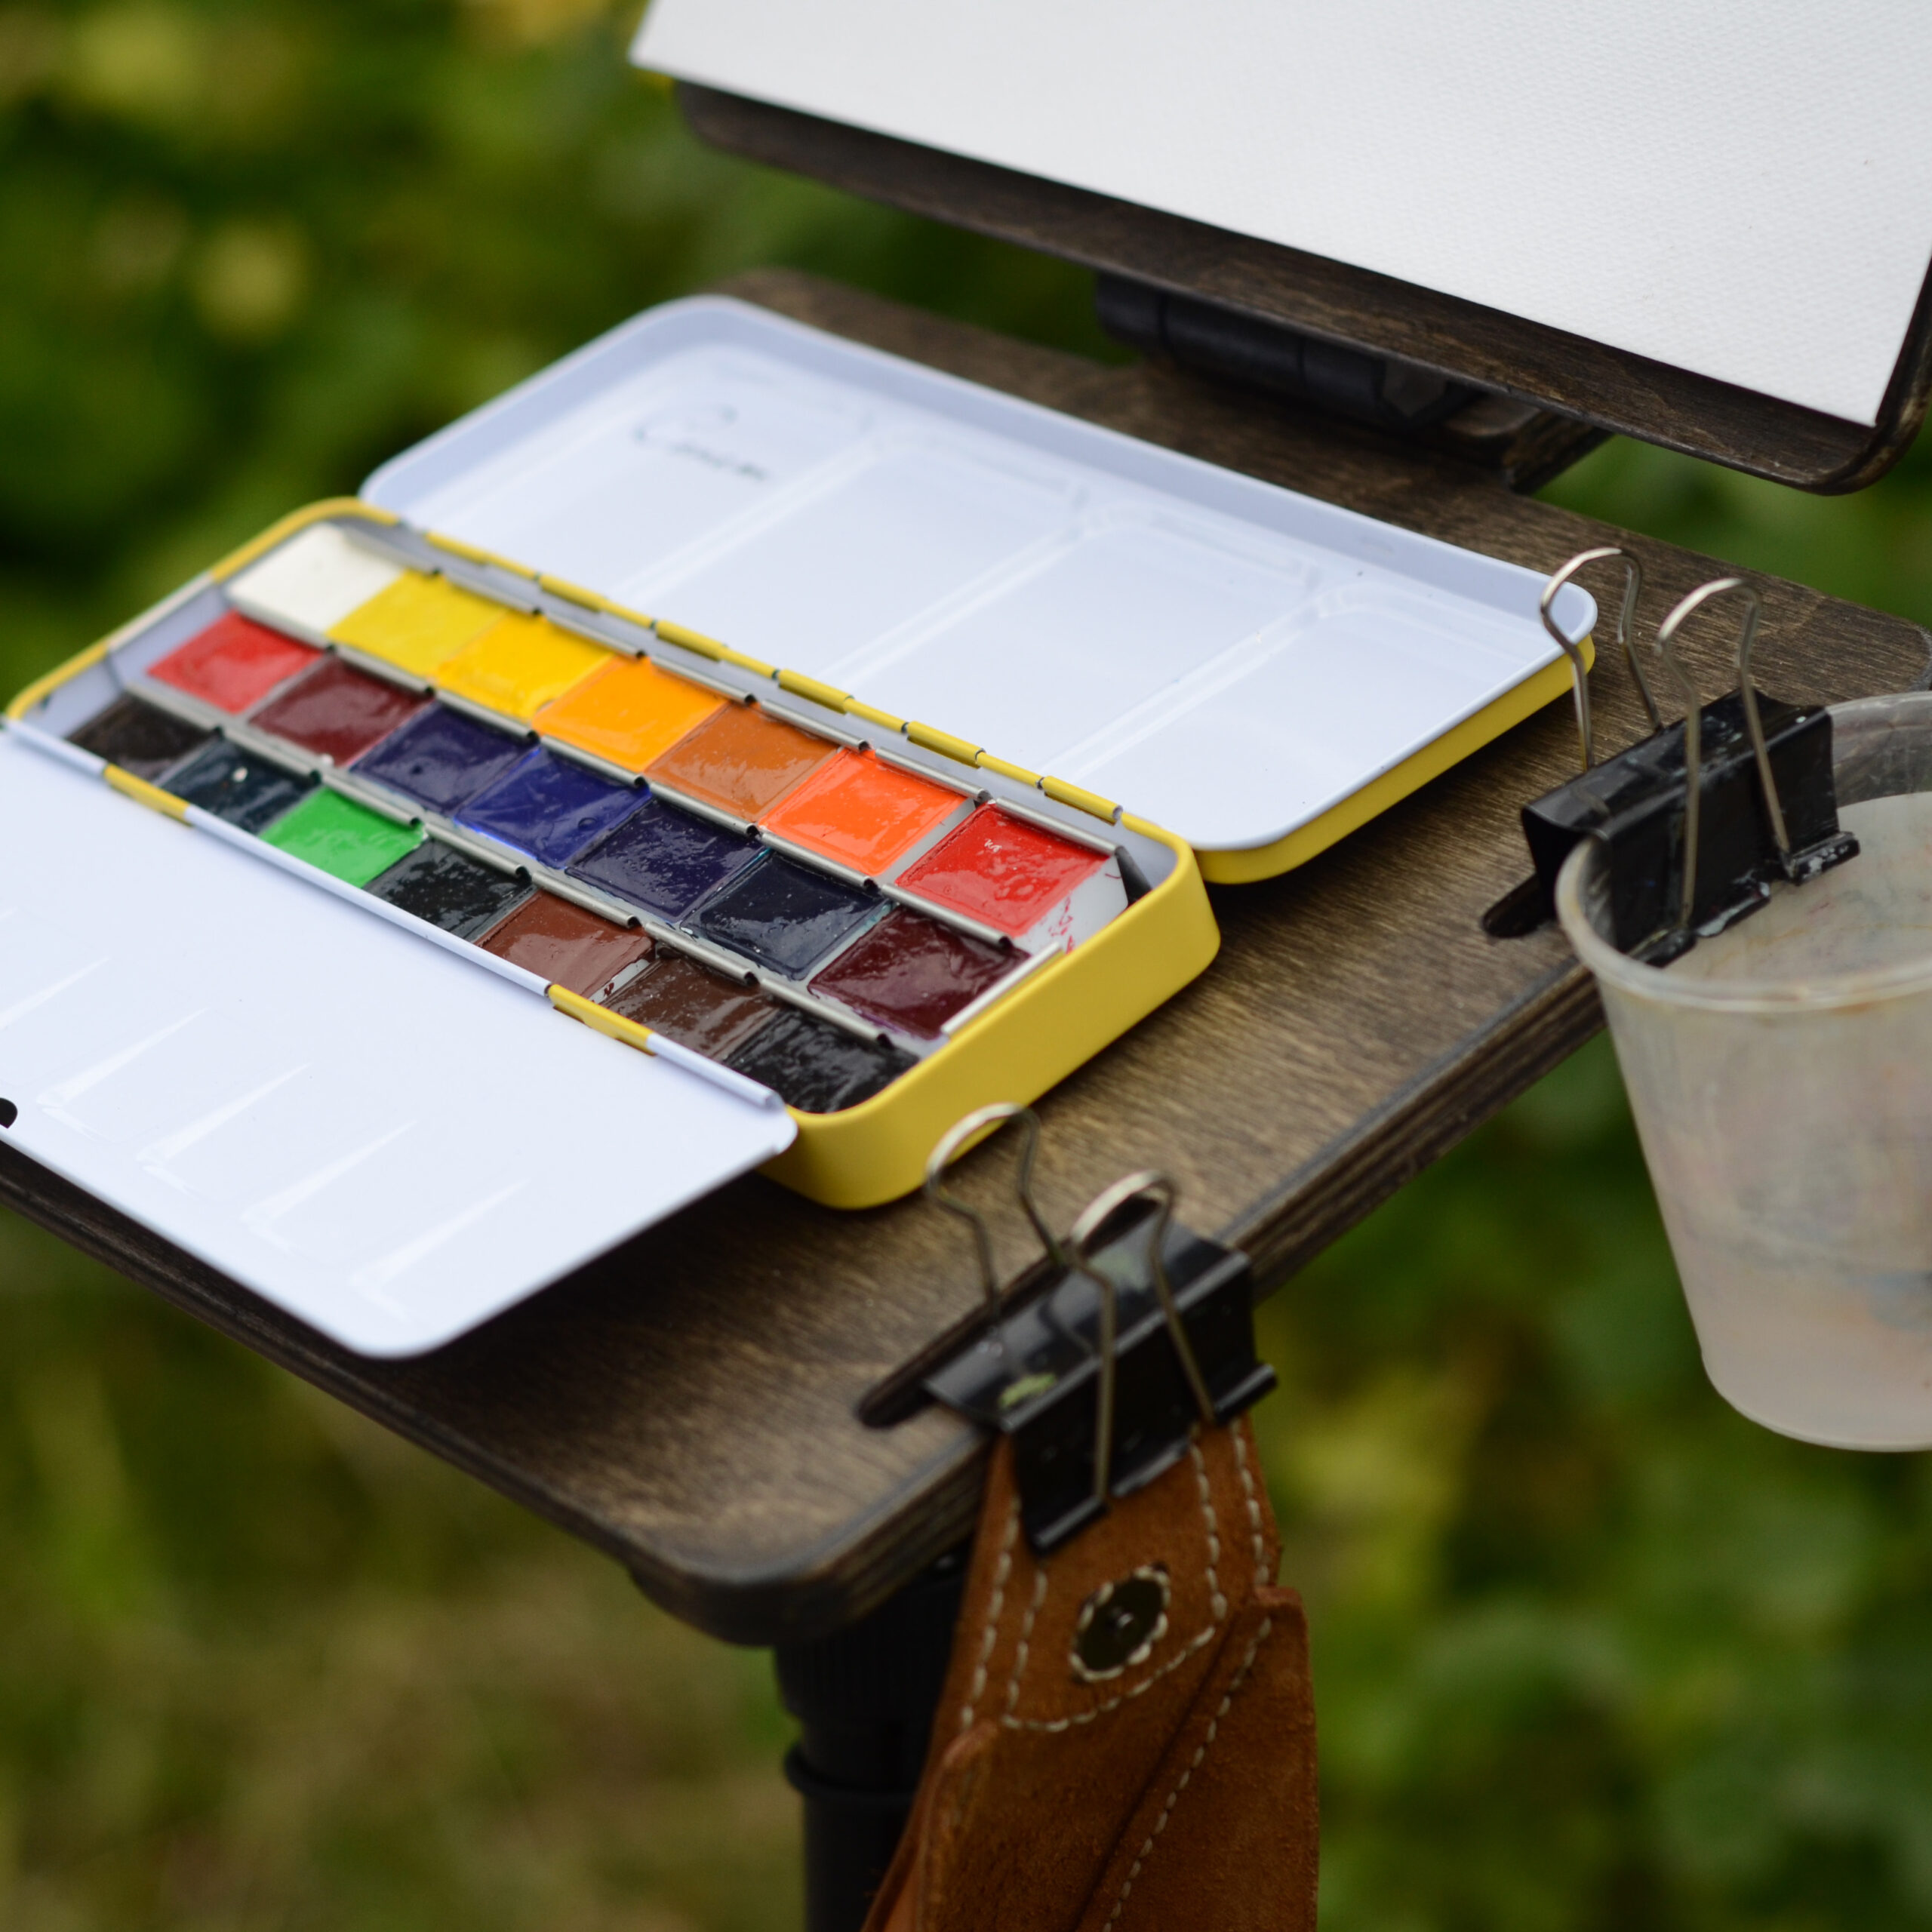 Watercolor easel for metal palettes (made to order) - Martletpochades